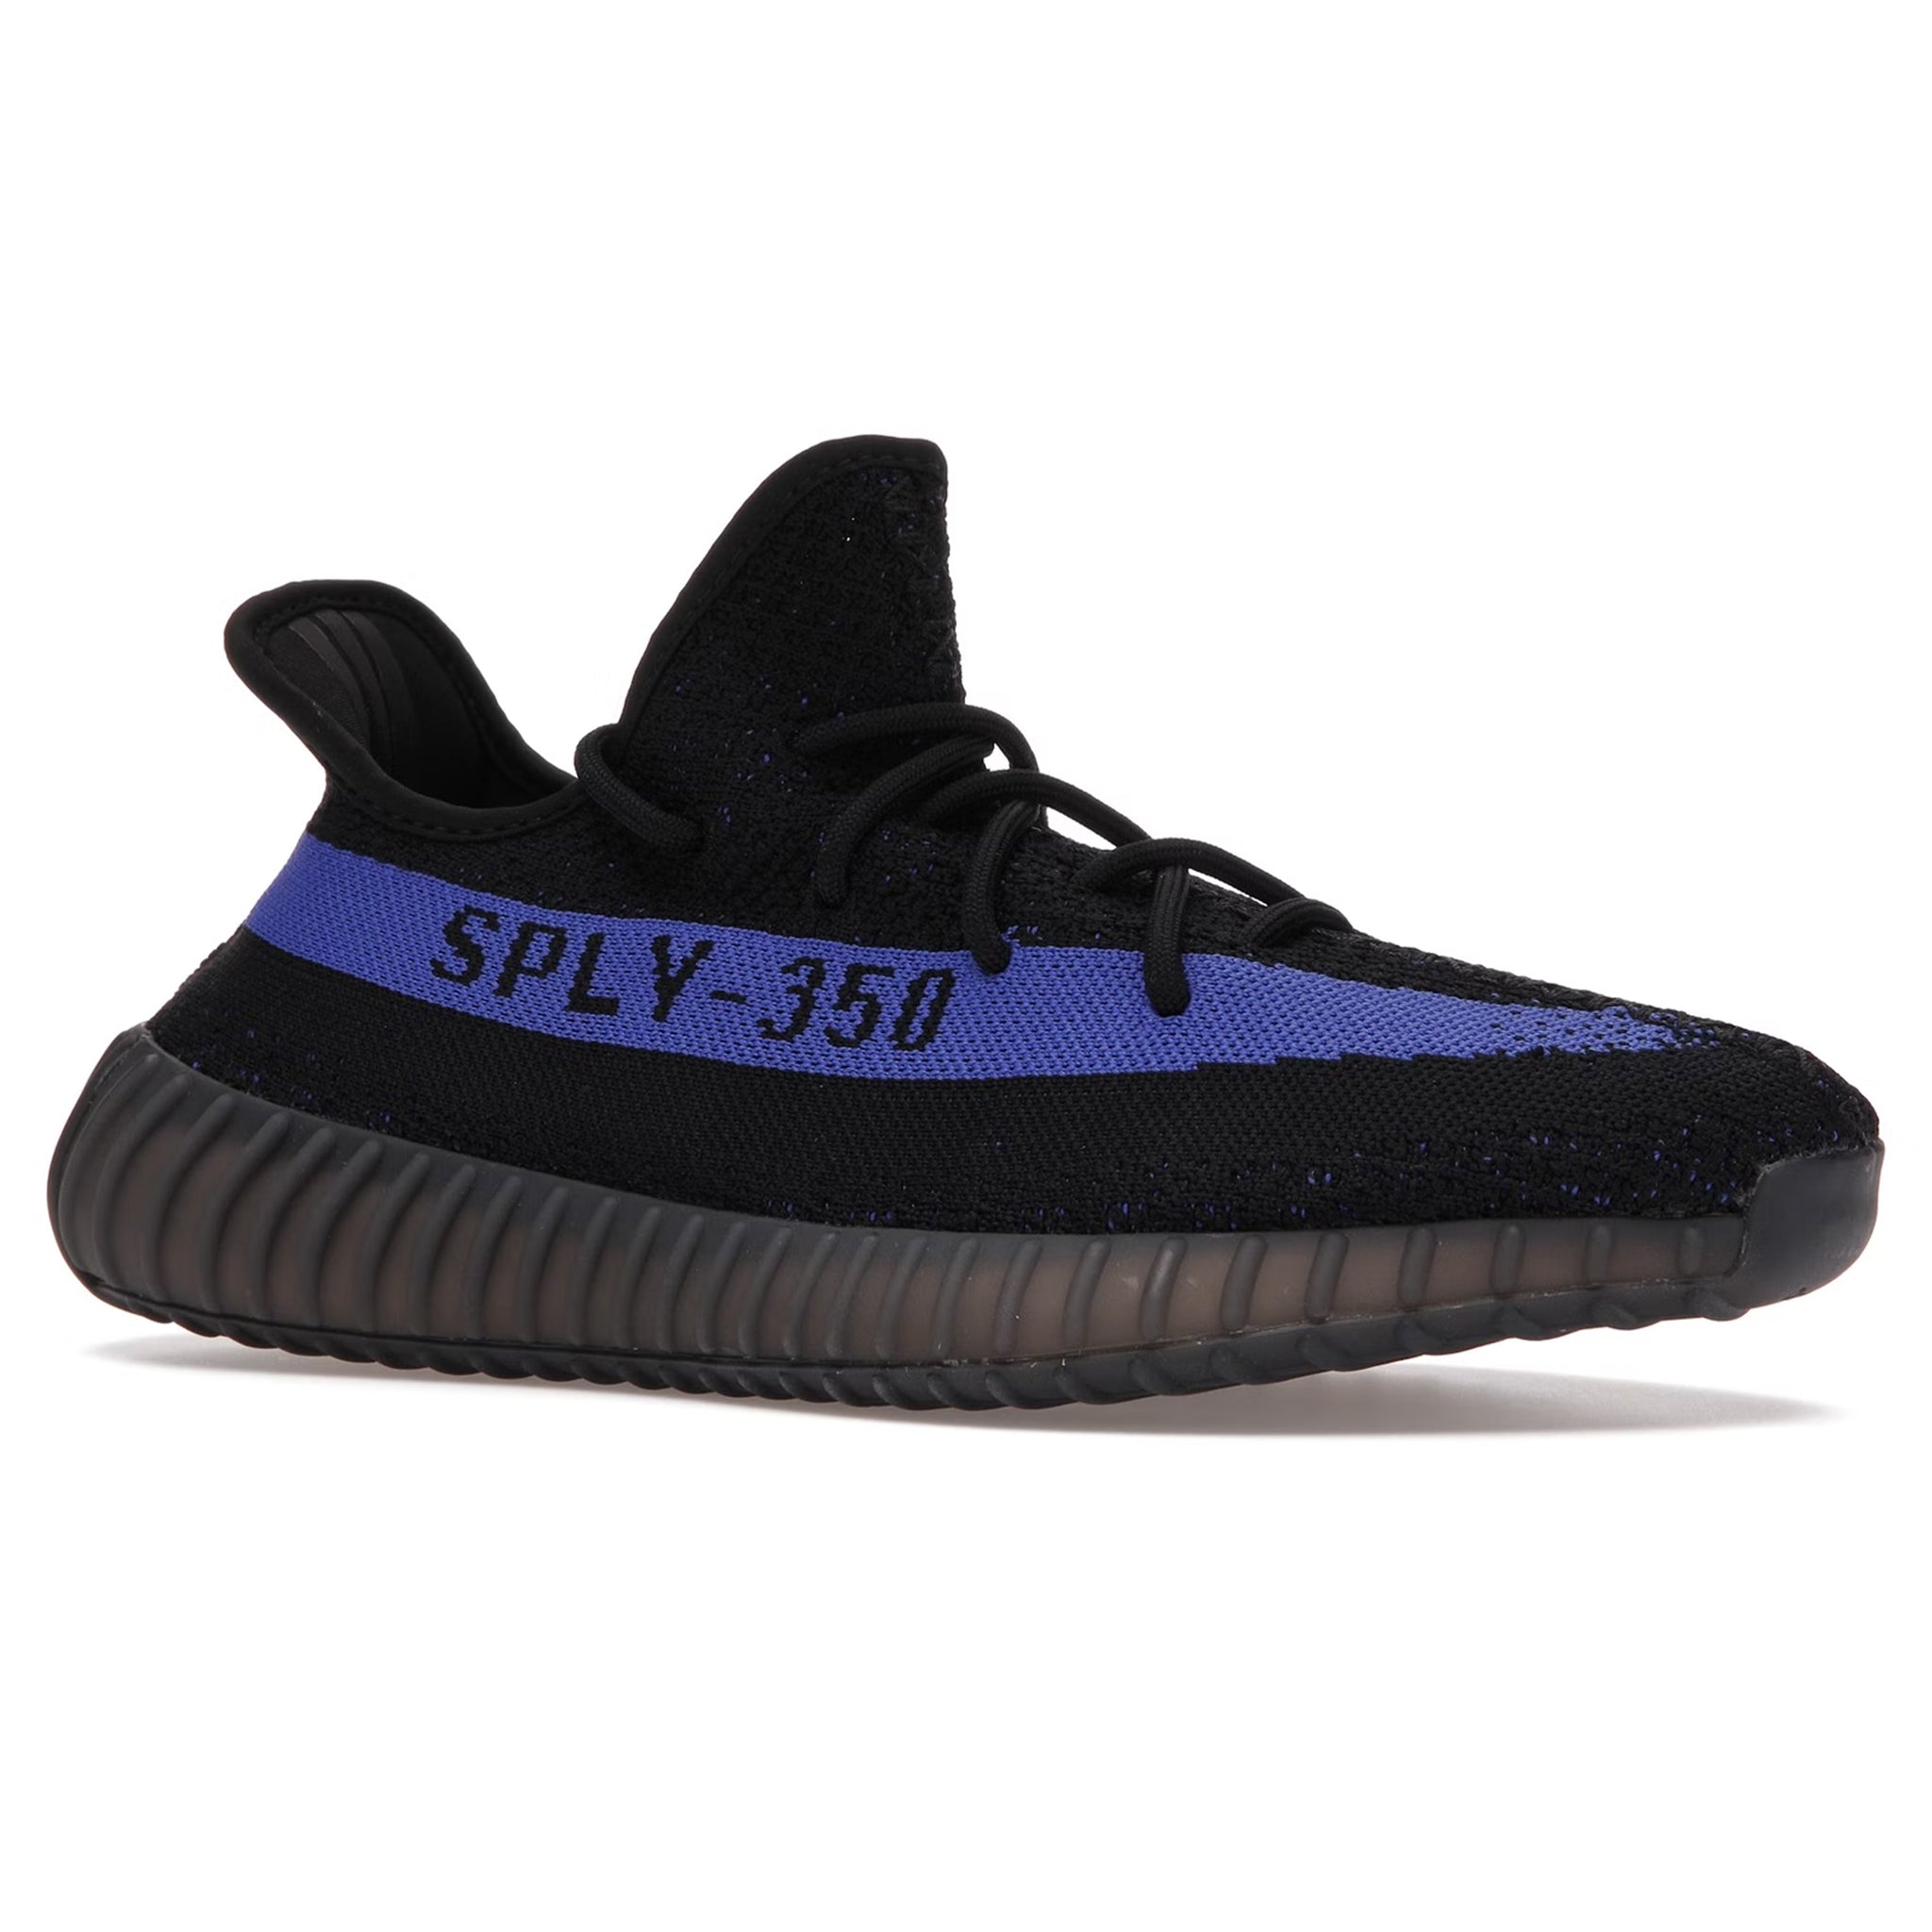 front view of Adidas Yeezy Boost 350 V2 Dazzling Blue GY7164